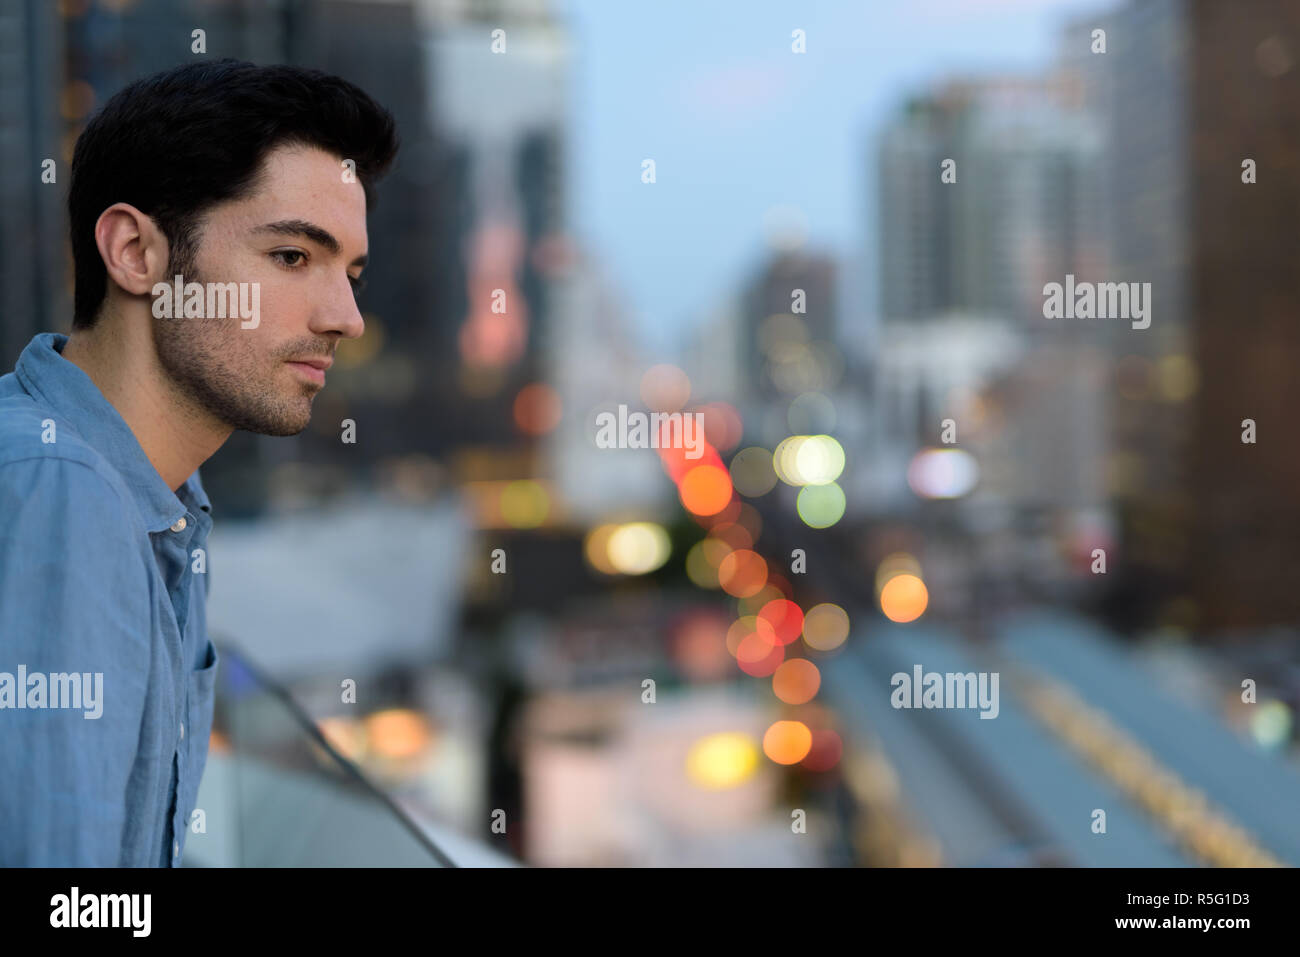 Portrait of young handsome man outdoors at night in city Stock Photo